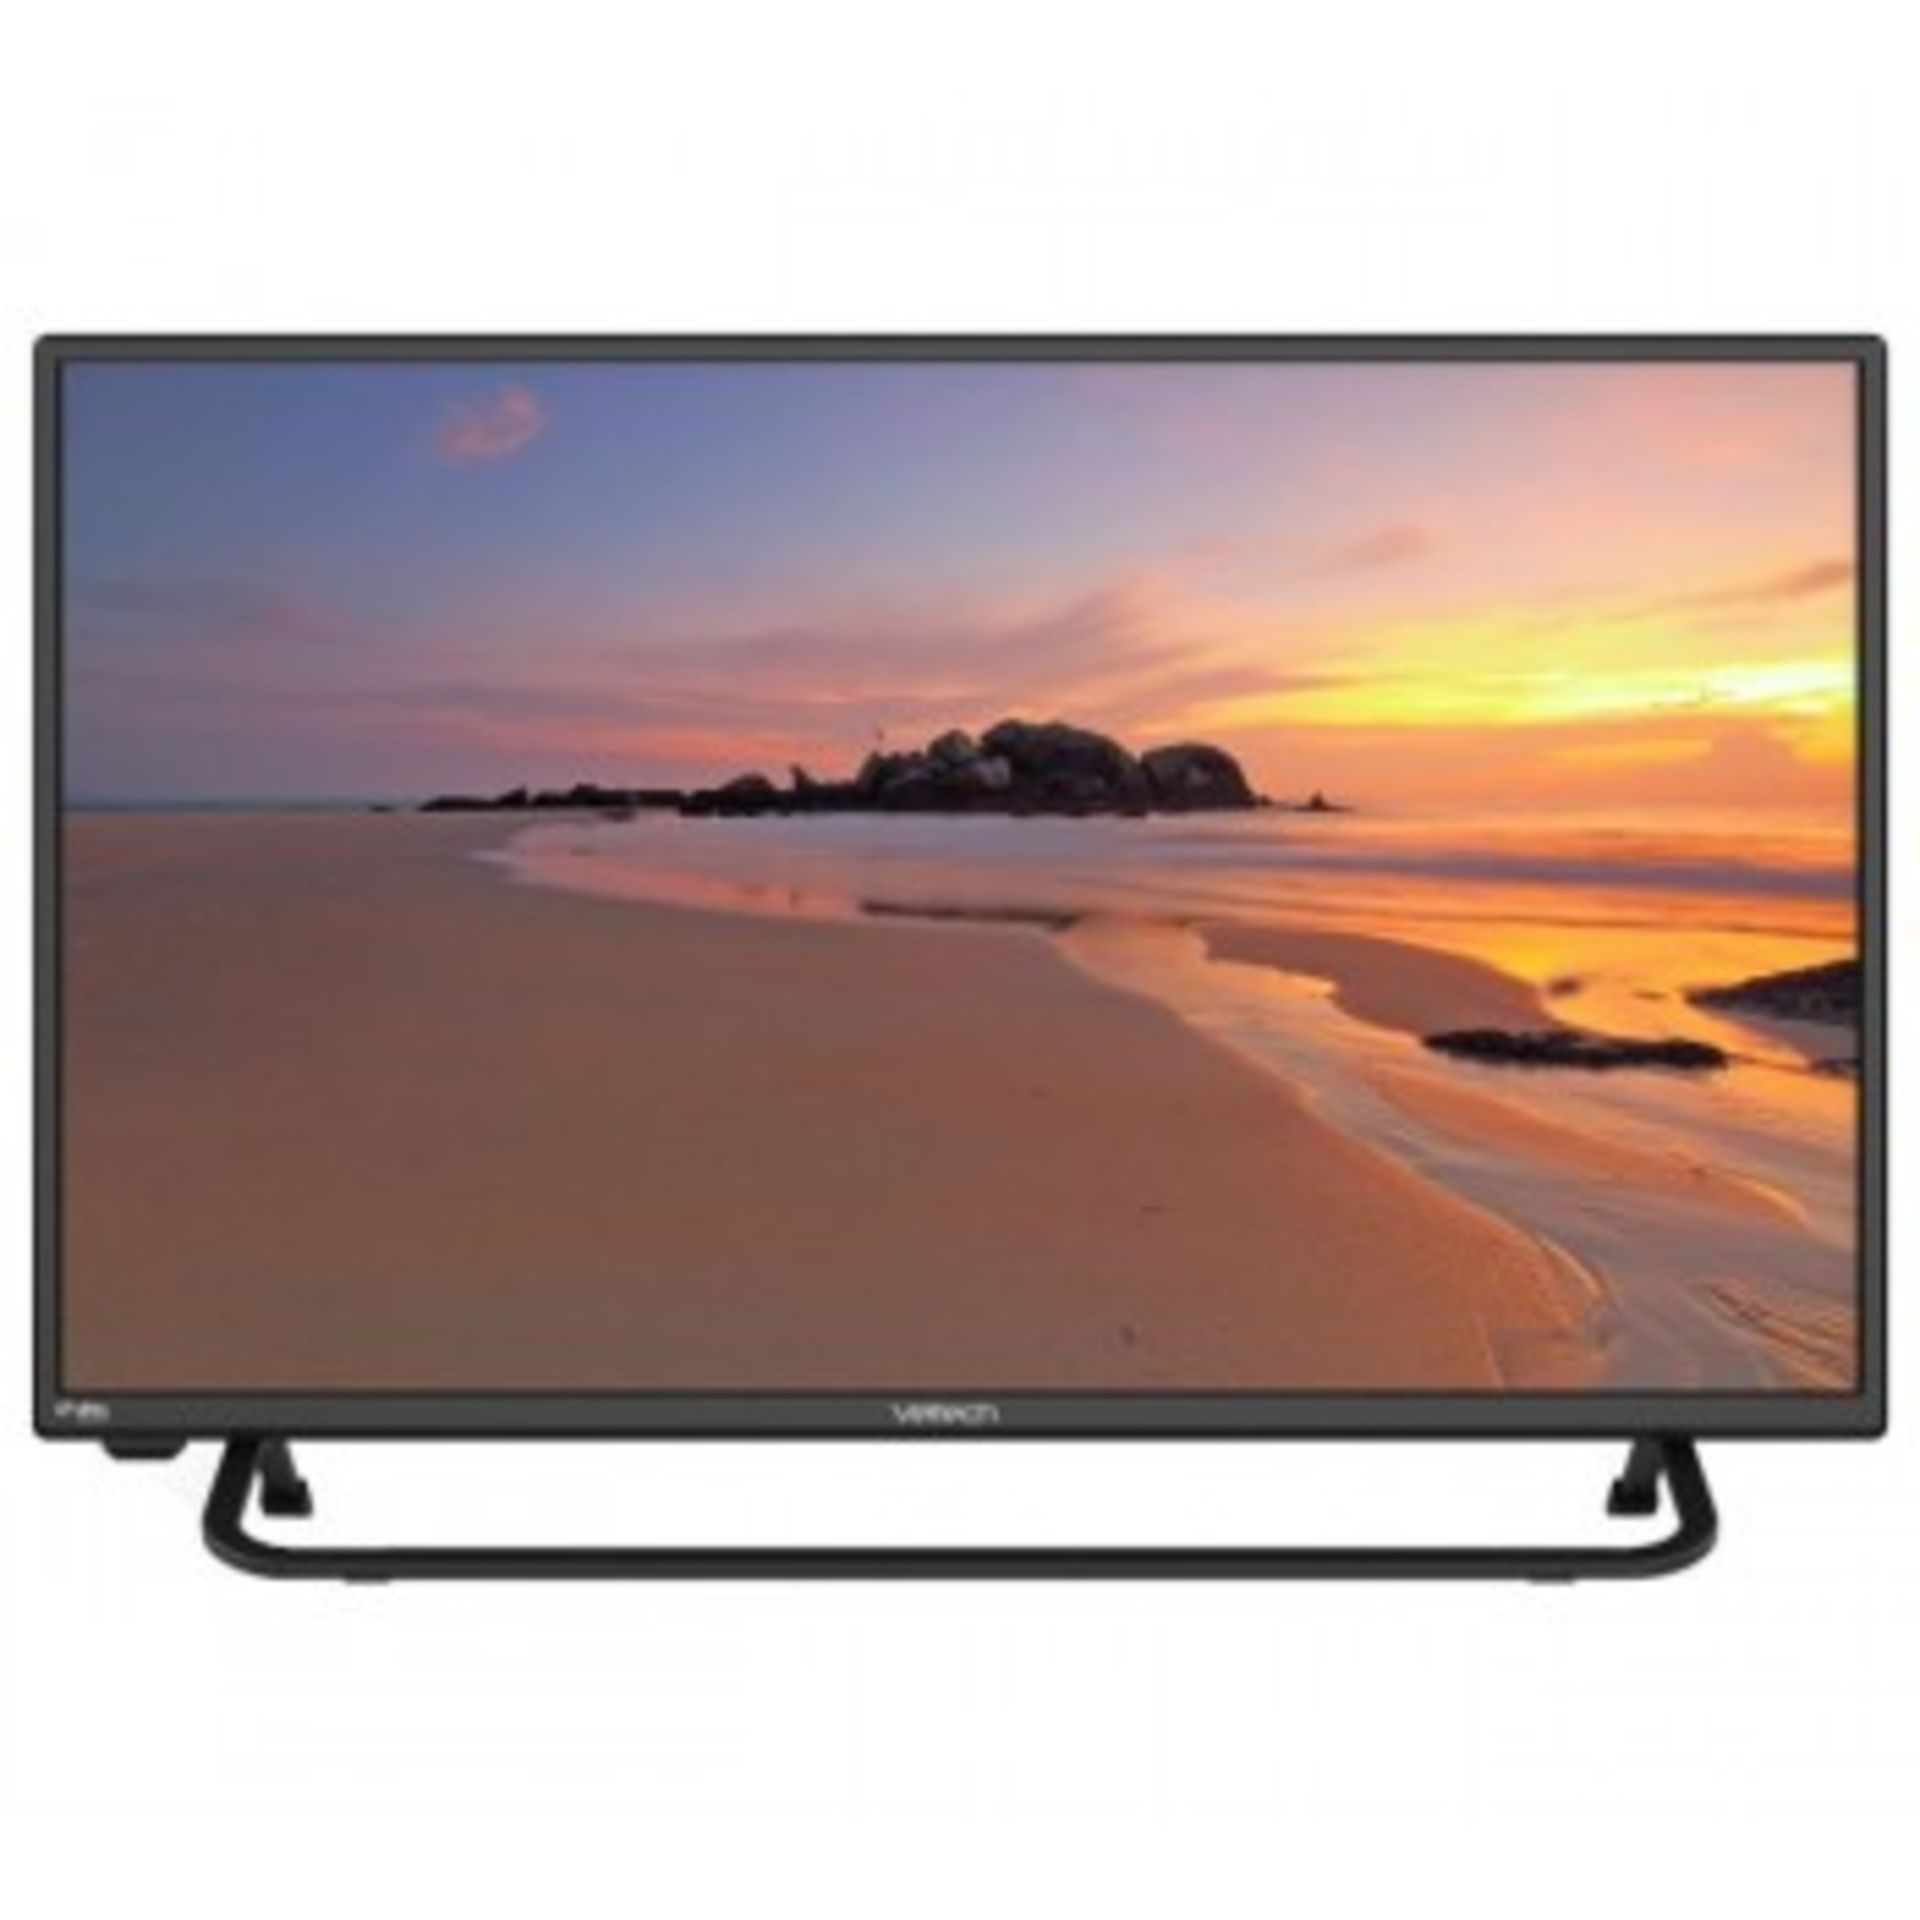 V Grade A Veltech 28" Widescreen LED TV With Built In DVD Player - Freeview HD - HD Ready - HDMI -